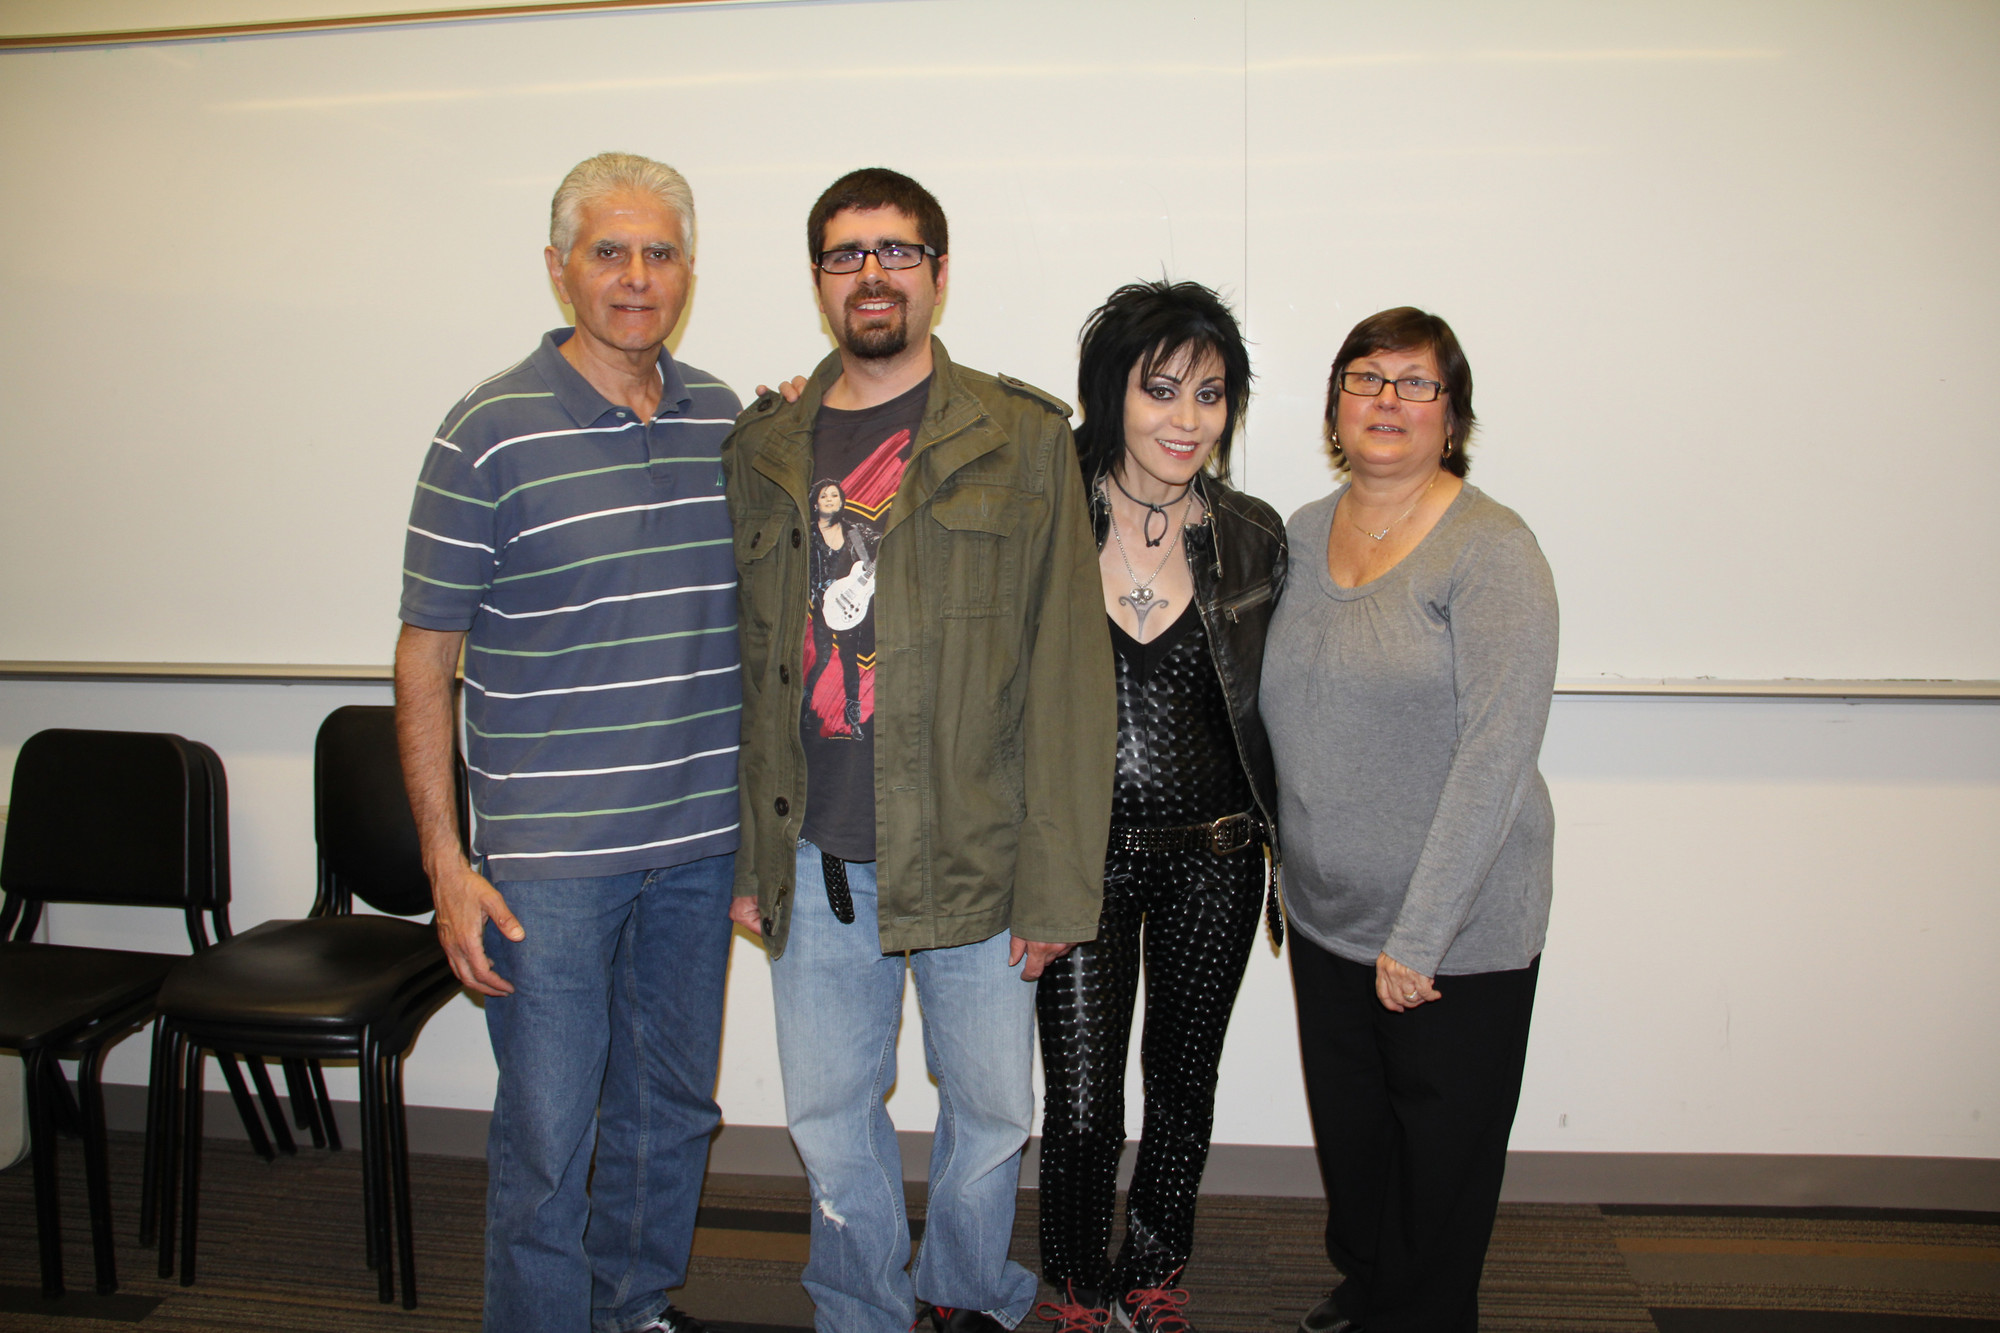 Angelo Maroulis, with his son Angelo and wife Cathy, met with Joan Jett before her concert at Molloy College’s Madison Theatre.